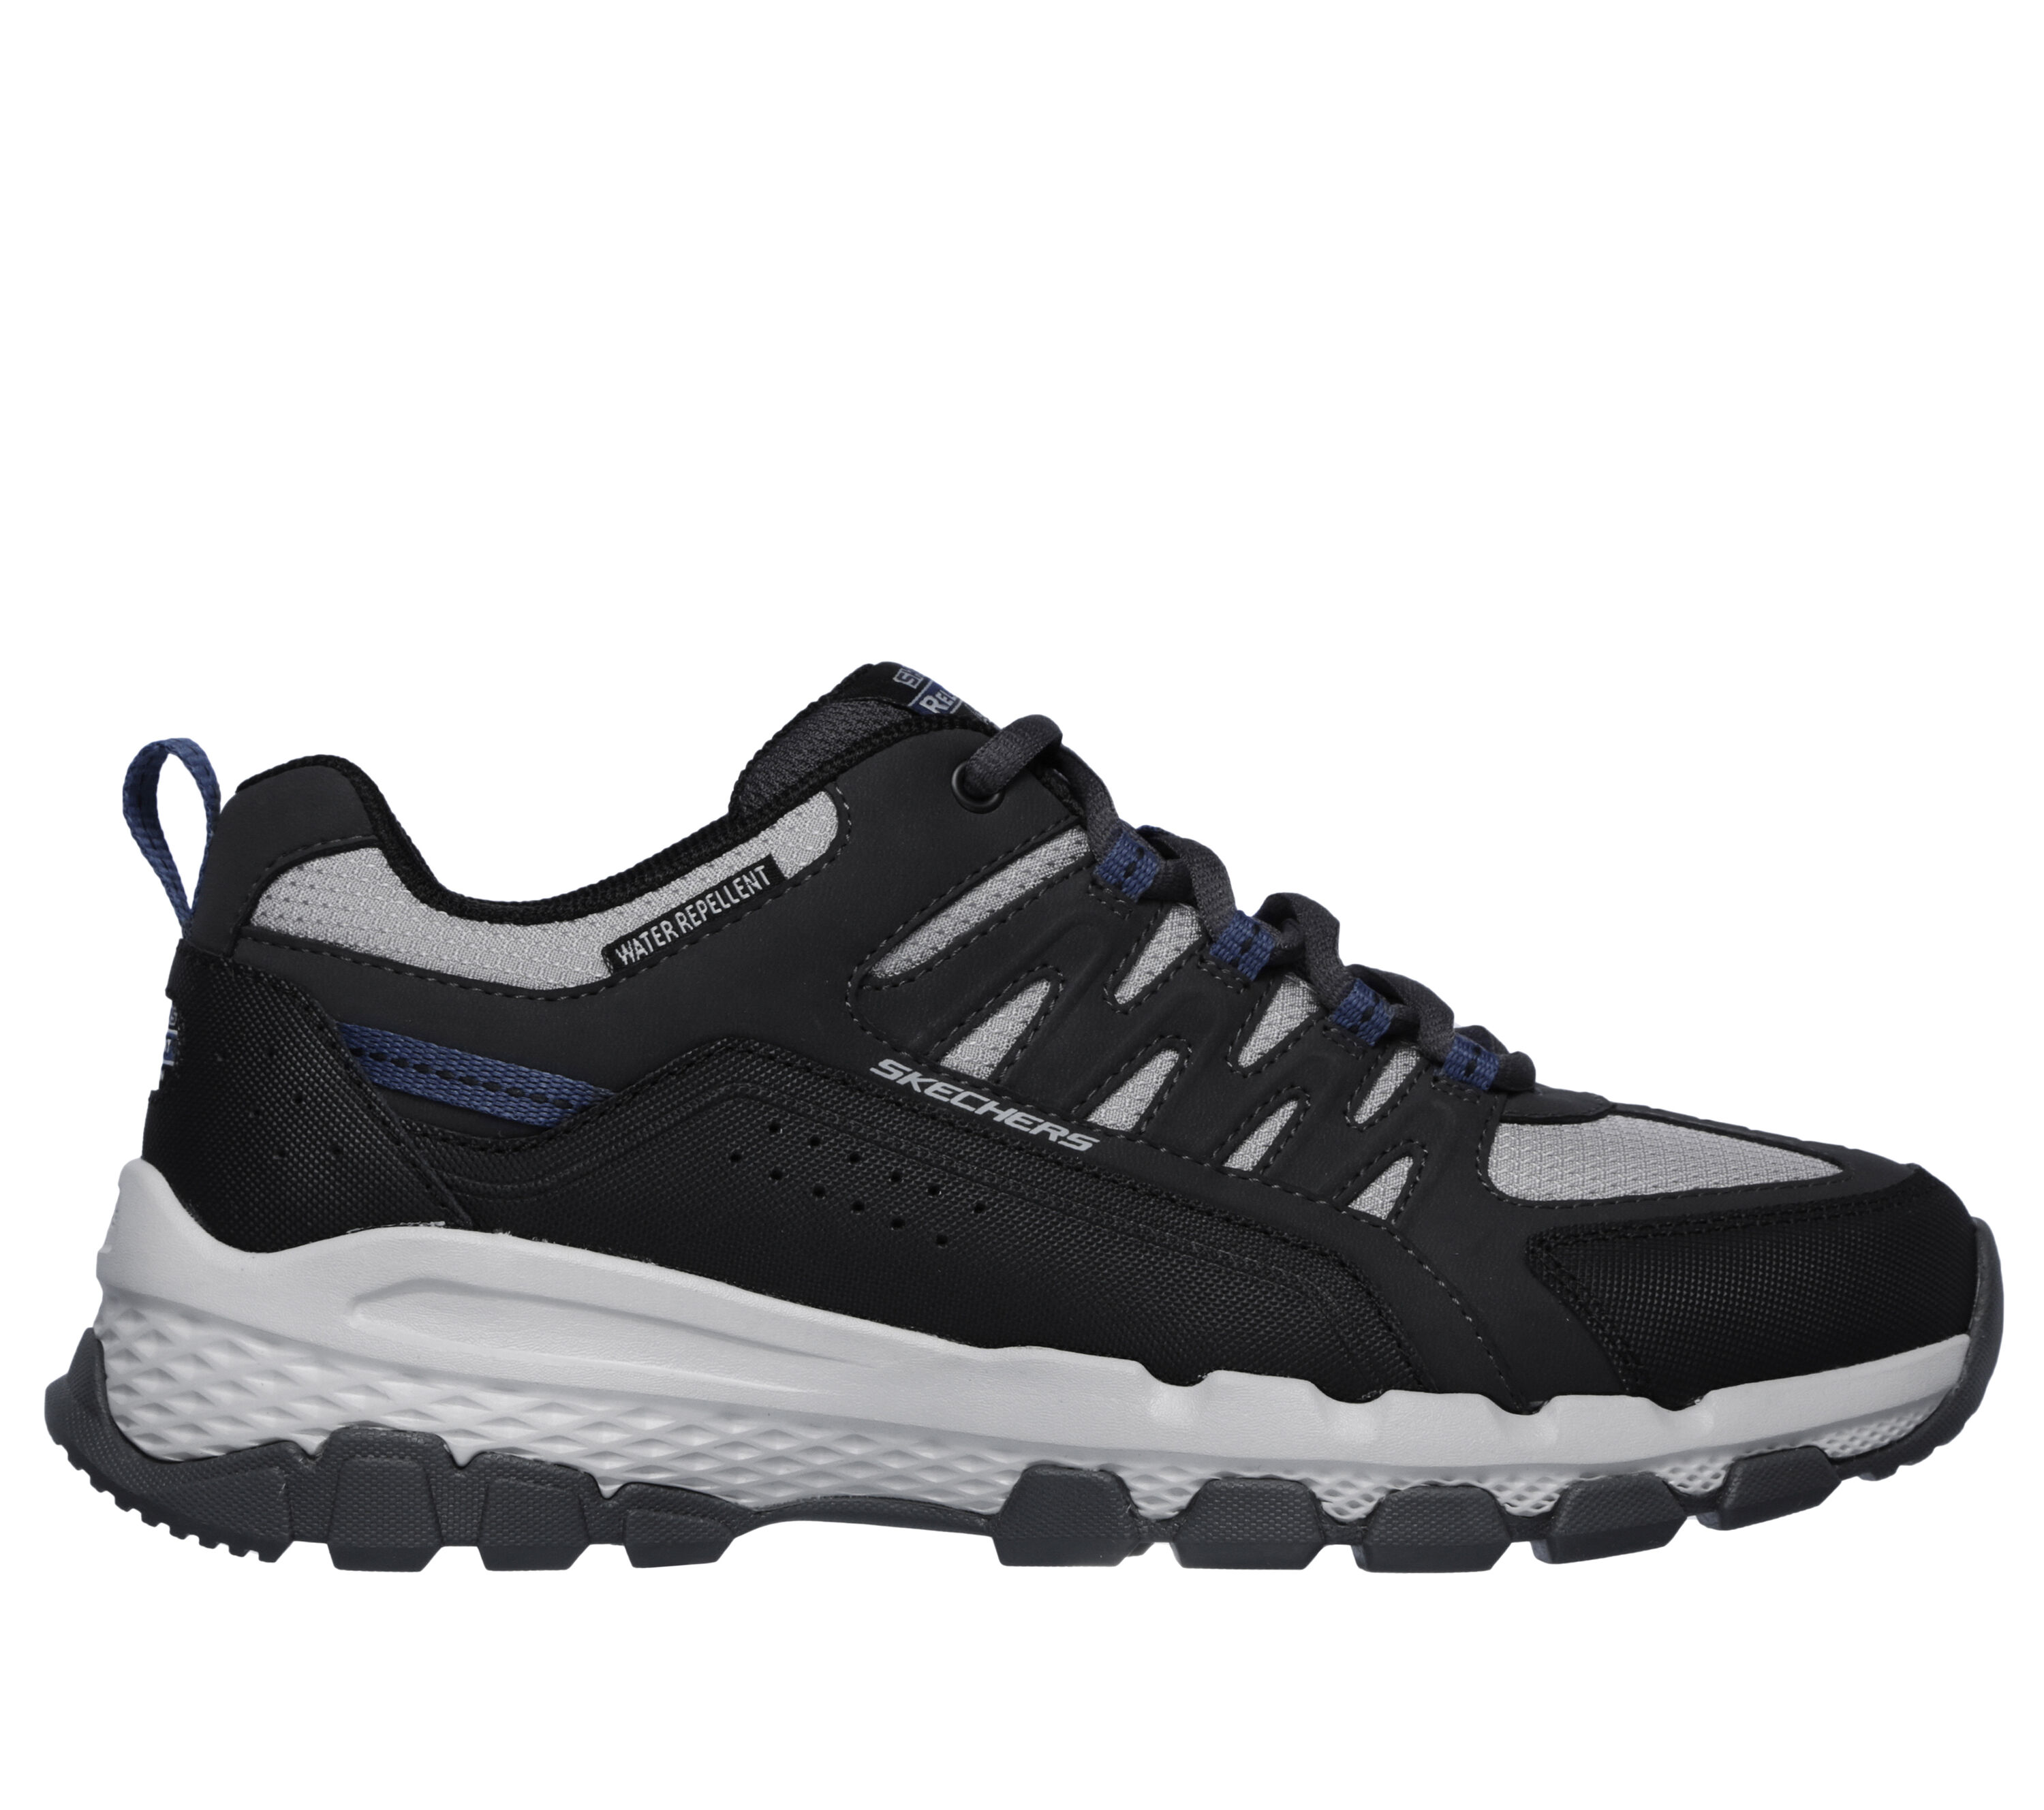 Shop the Relaxed Fit: Outland 2.0 - Rip-Staver | SKECHERS